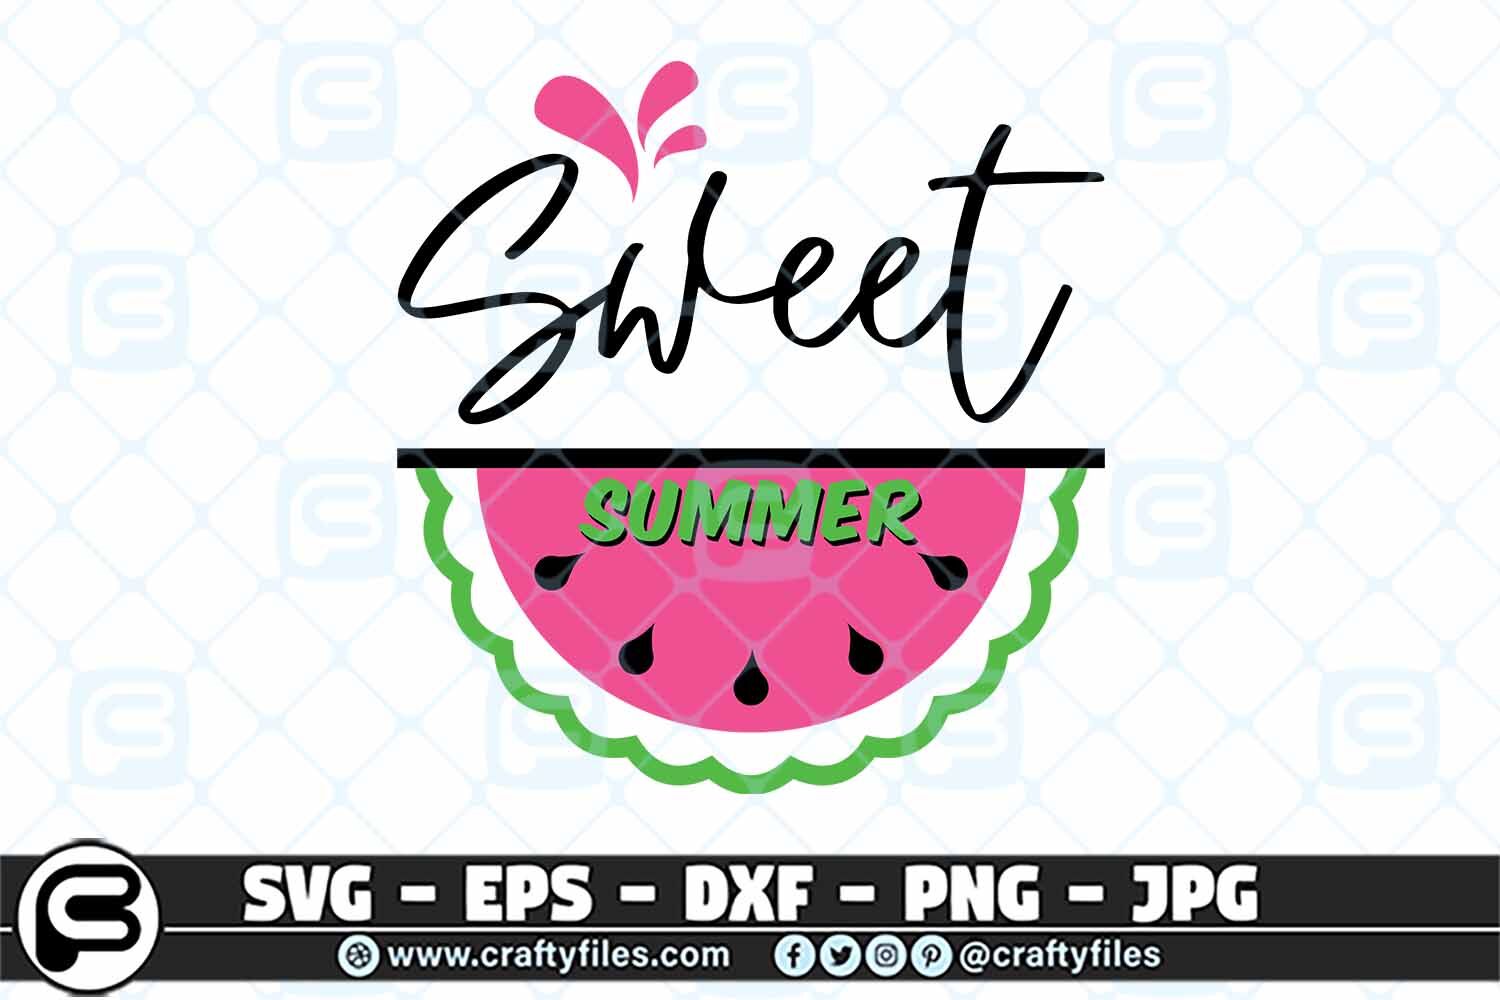 Download Sweet Summer Svg Hello Summer Svg Beach Time Svg By Crafty Files Thehungryjpeg Com